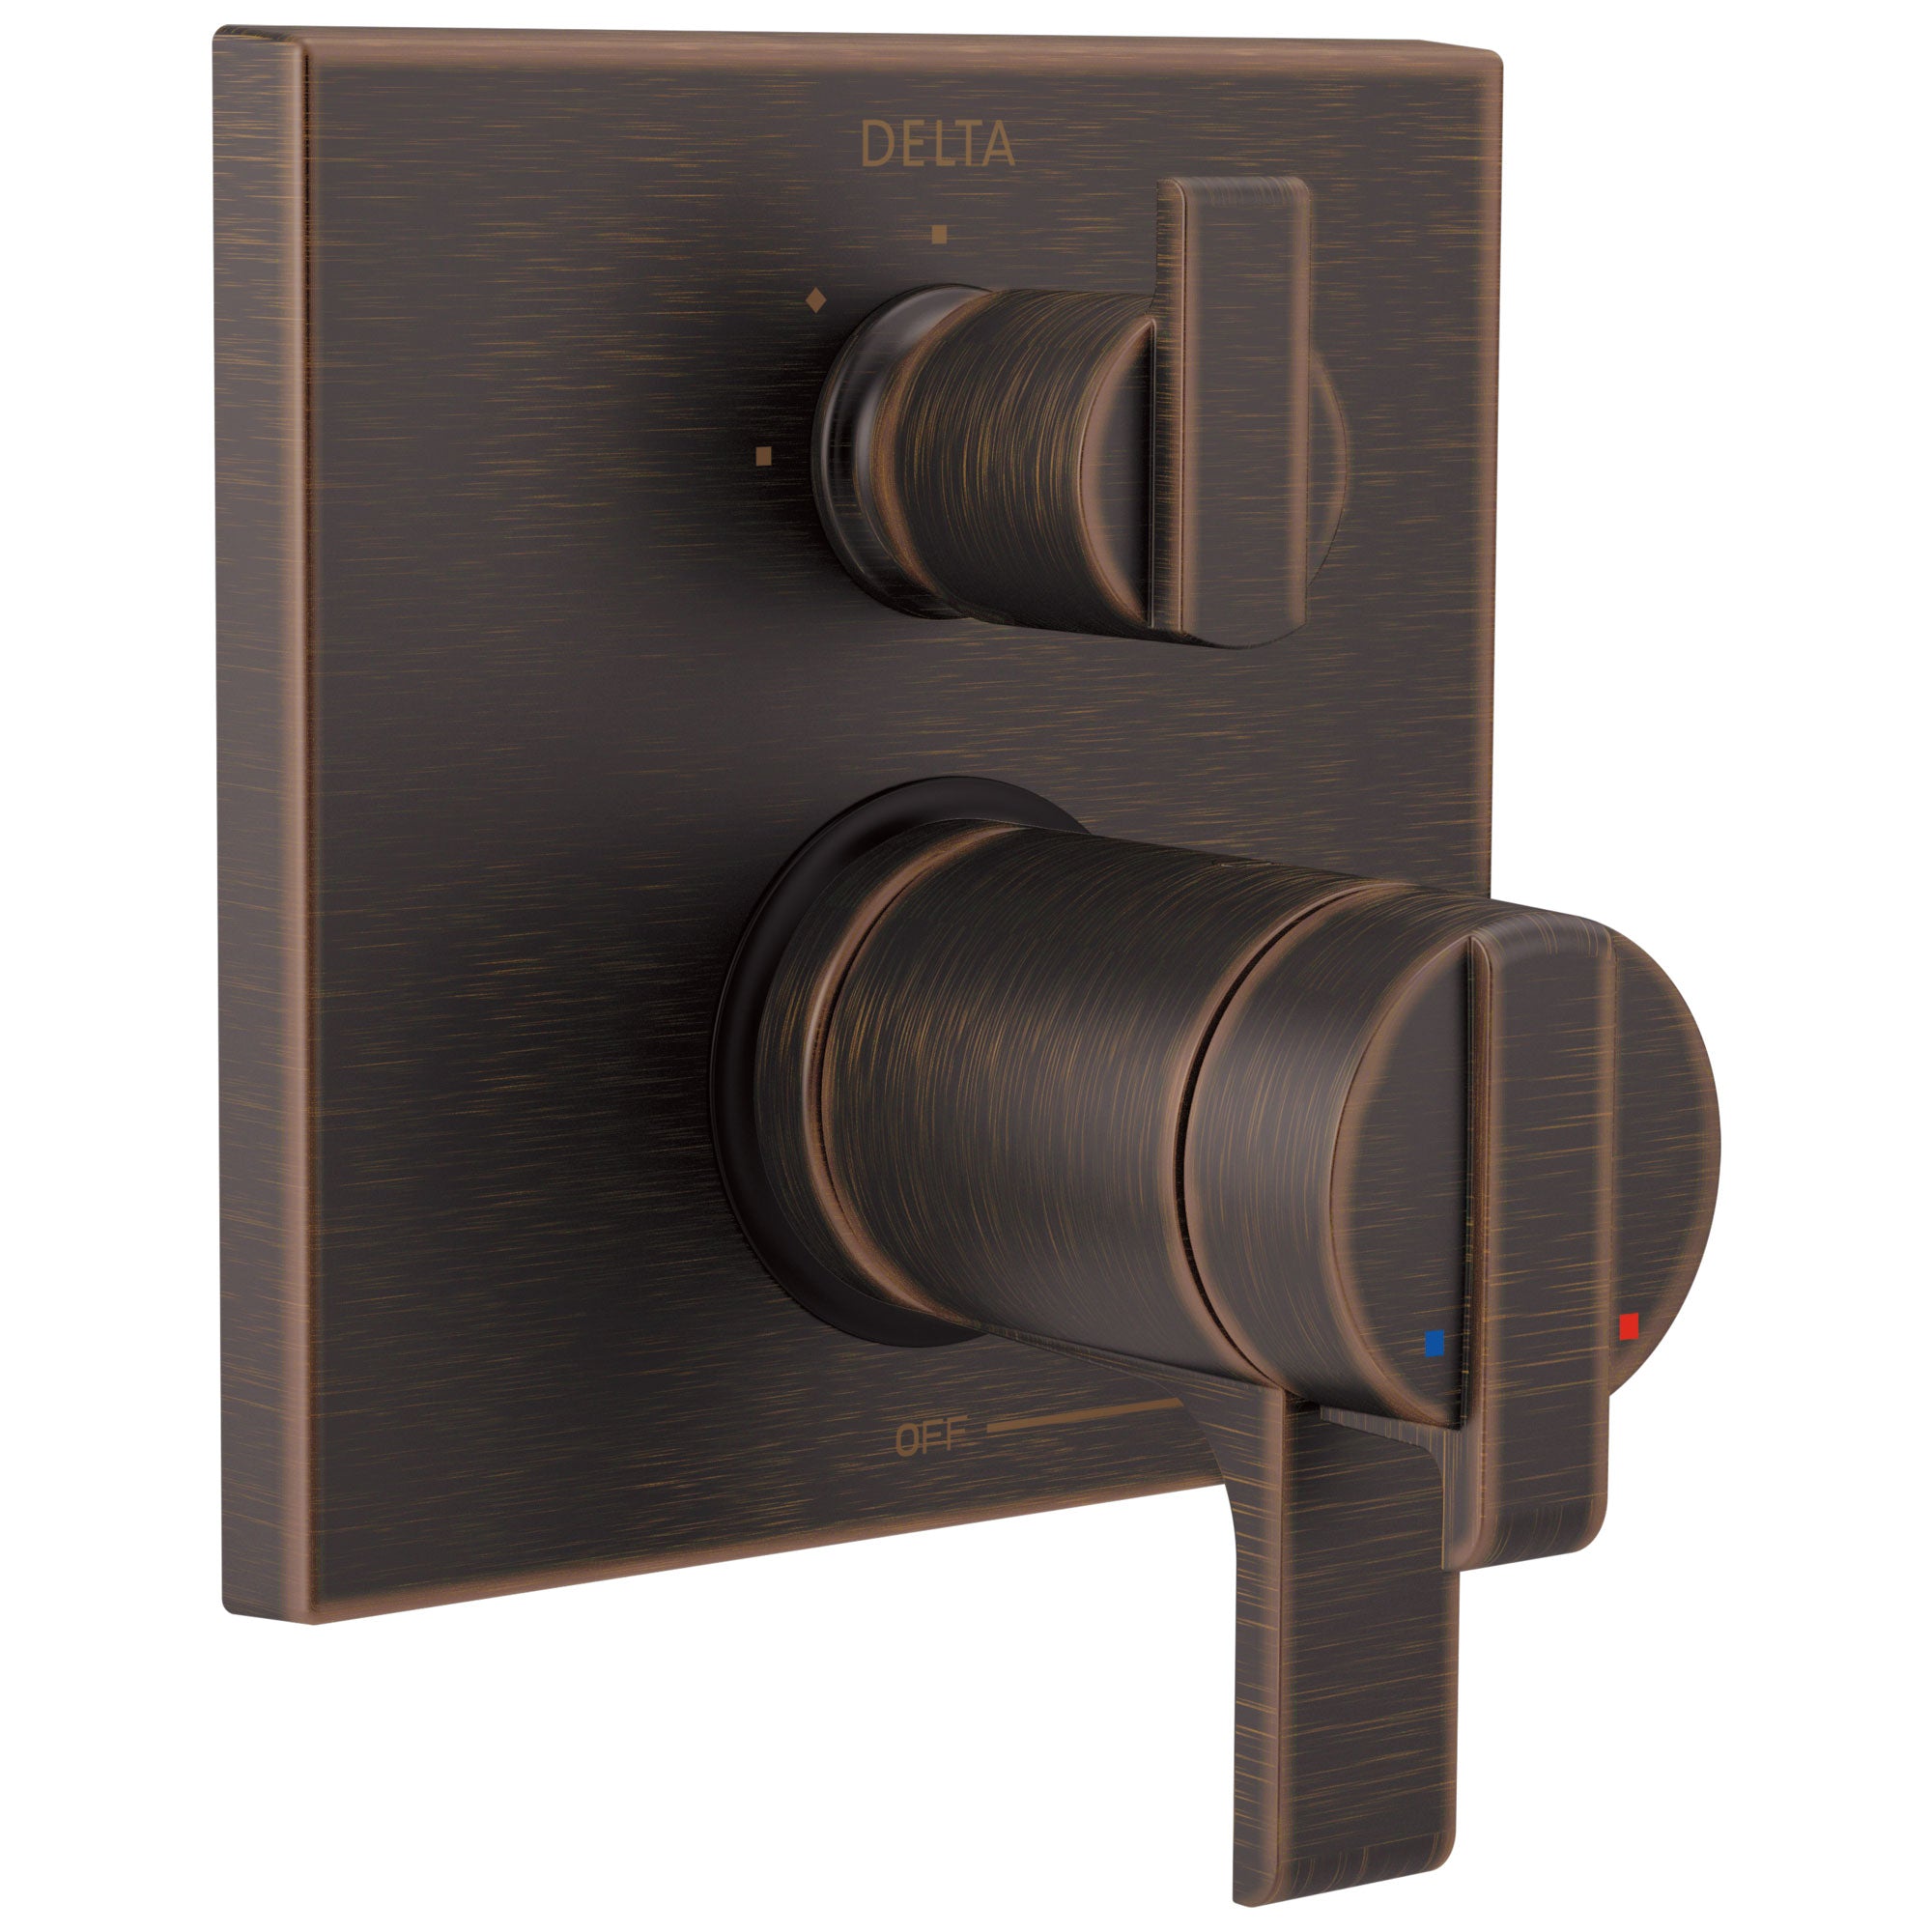 Delta Ara Collection Venetian Bronze Modern Thermostatic Shower Faucet Control with 3-Setting Integrated Diverter Trim (Requires Valve) DT27T867RB